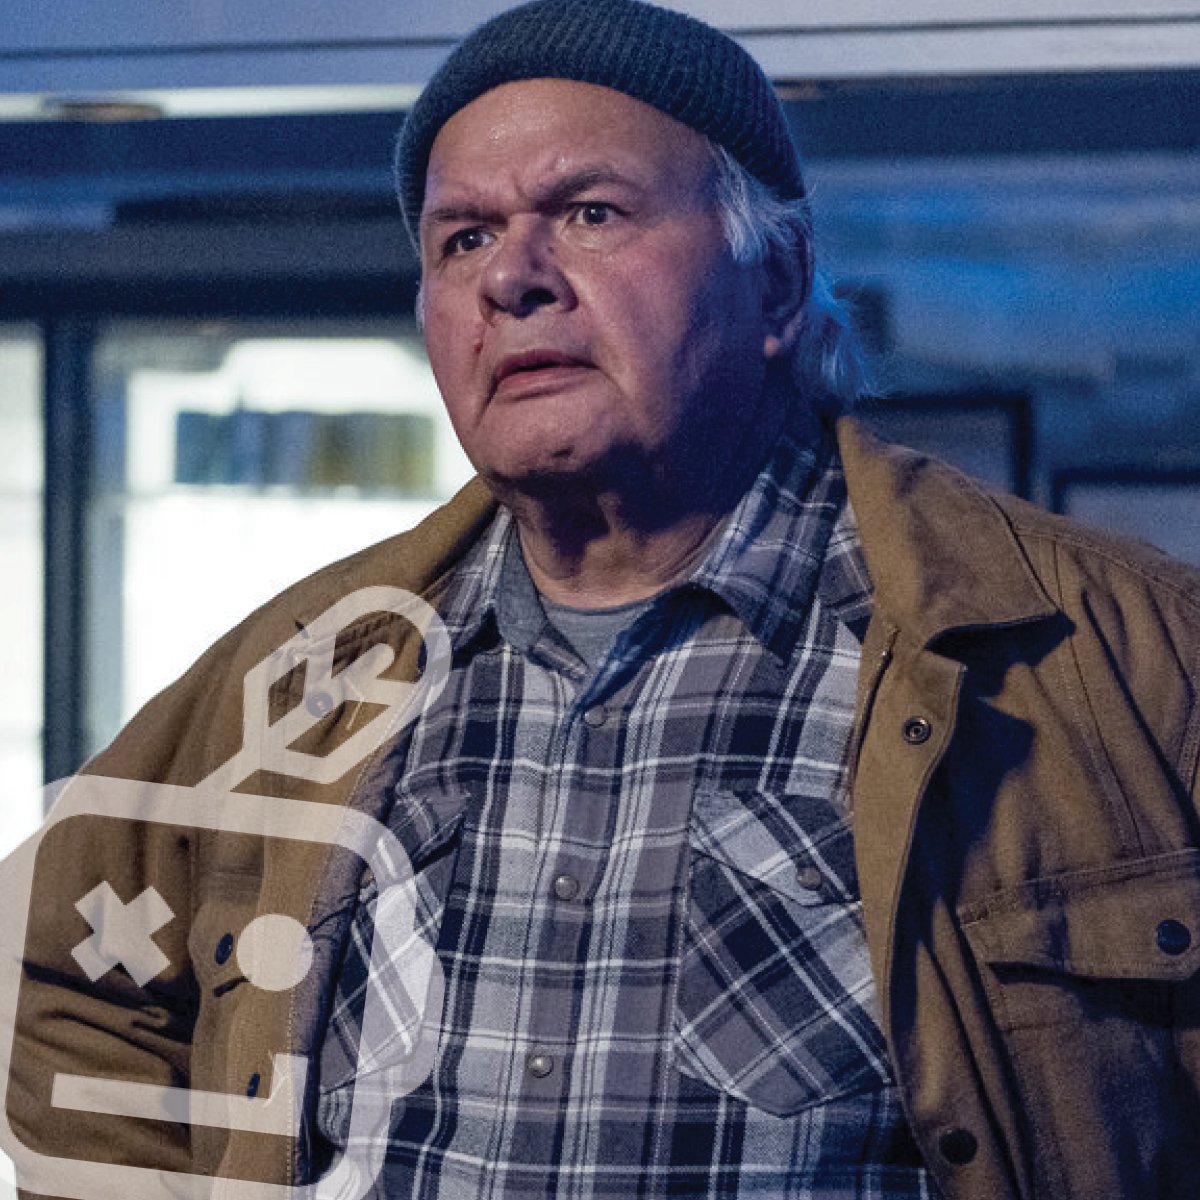 If you haven't checked the first two seasons of @SYFY's RESIDENT ALIEN, you need to check out @ATCGJen's primer on the series before Season 3 starts. Yes, it's got our favorite Unc, Gary Farmer! 🔗 atribecalledgeek.com/a-look-at-syfy…

#SYFY #ResidentAlien #NativesOnTV #AttentionIndiginerds